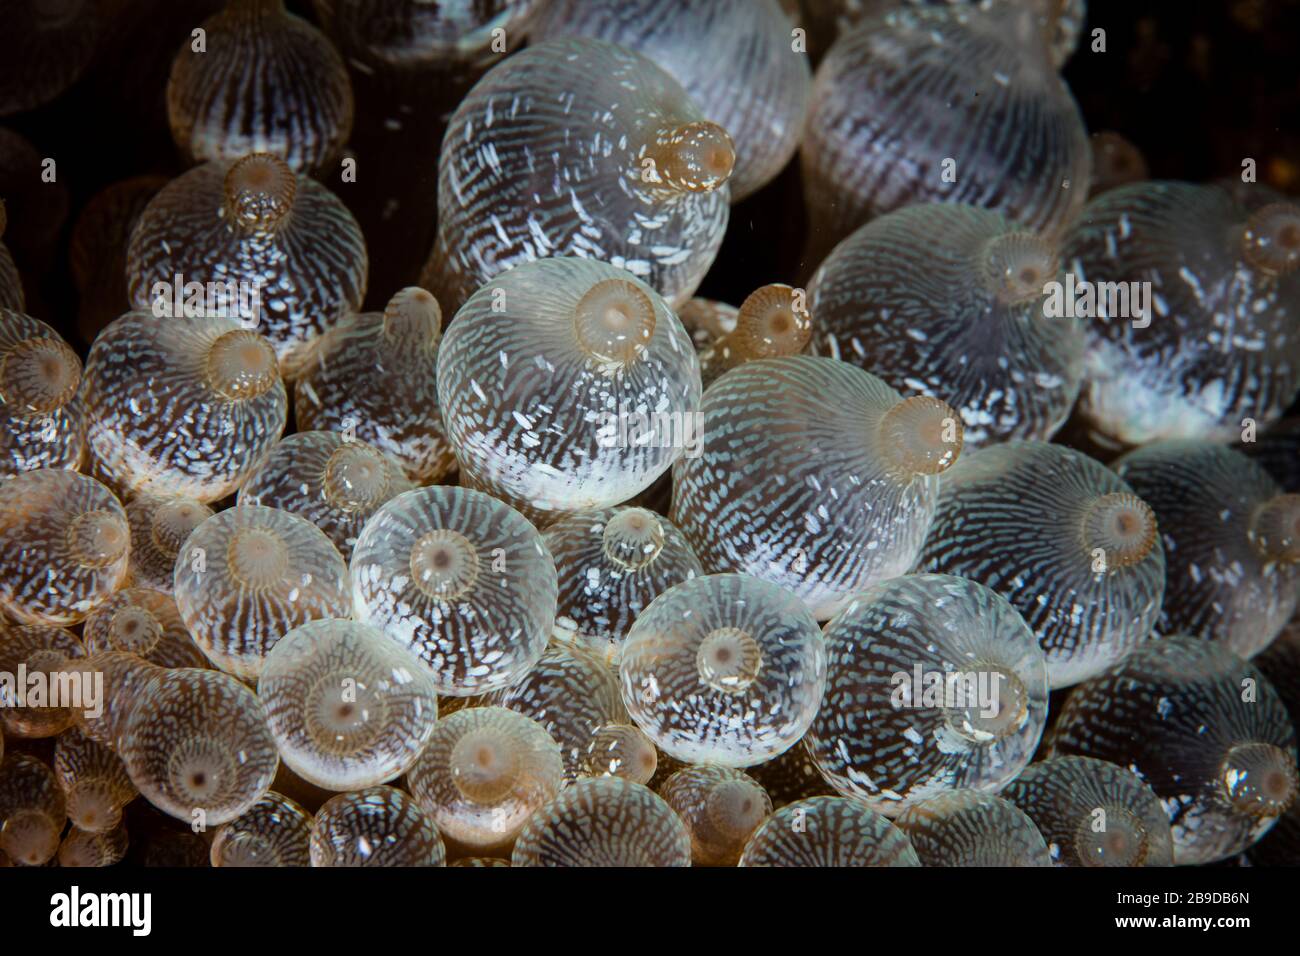 Detail of a bulbed anemone, Entacmaea quadricolor. Stock Photo